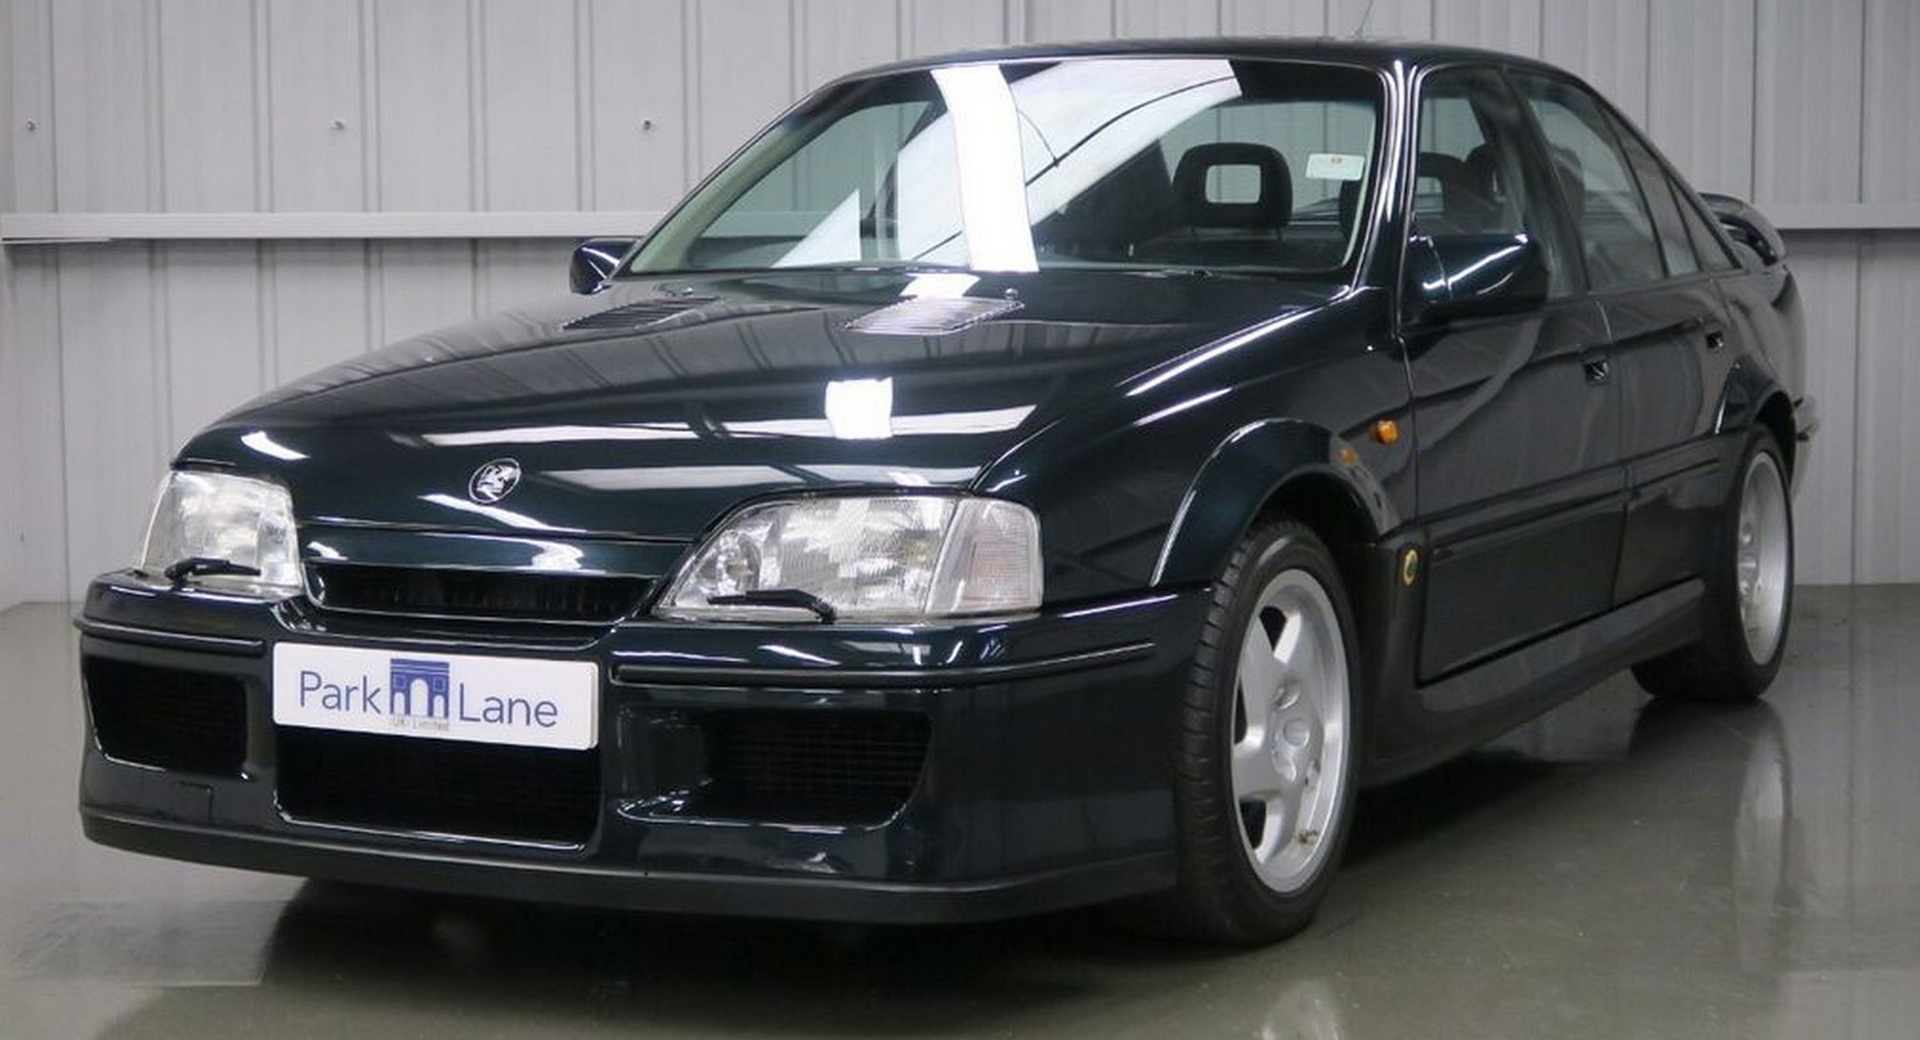 Lotus Carlton Was The Fastest Saloon In 1991 And A Low-Mileage One Goes For $165K Carscoops